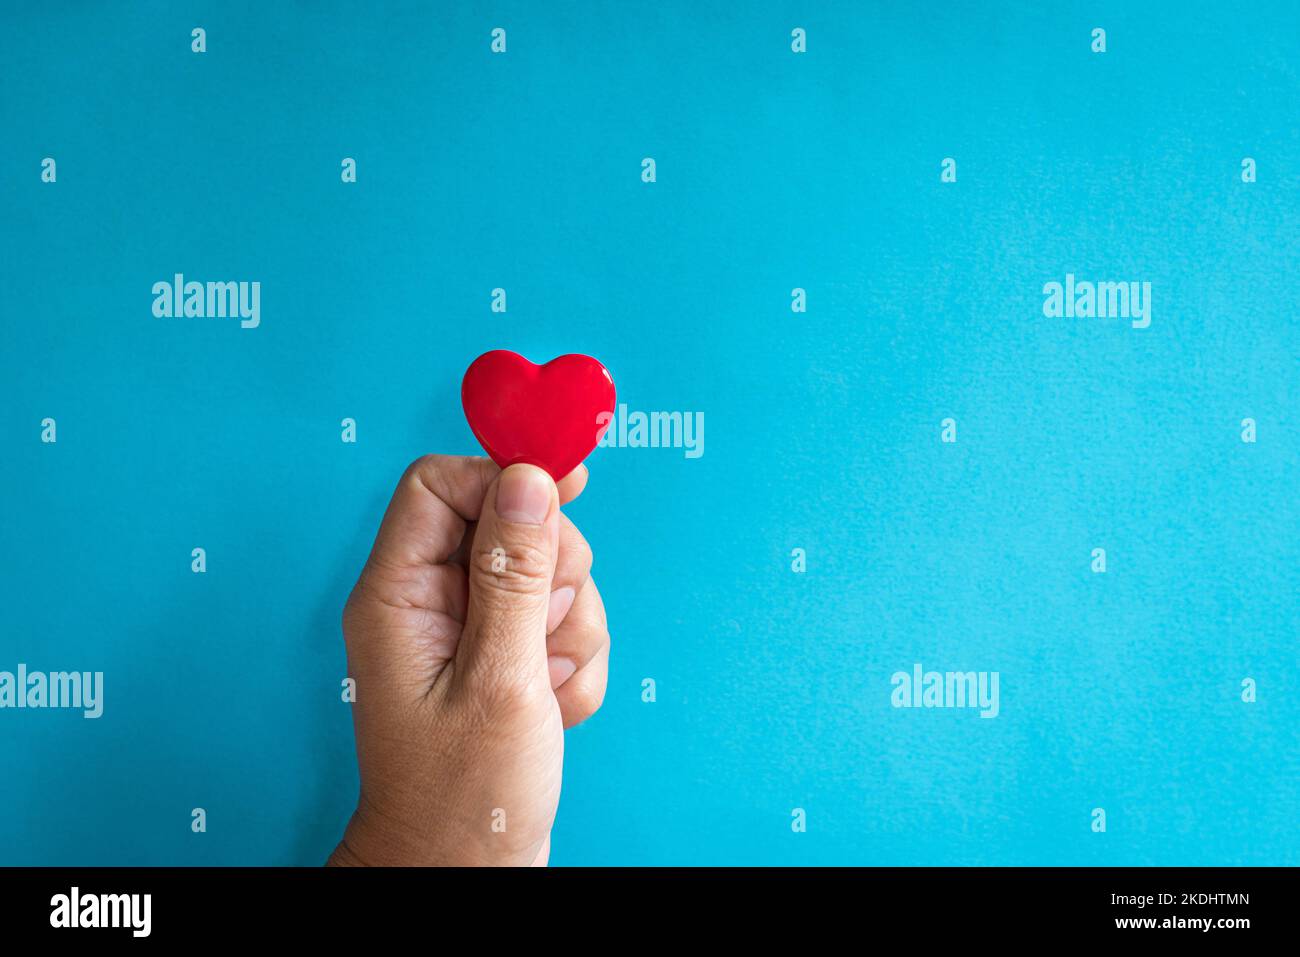 Heart health concept. Man's finger holding a red heart shape. Copy space. Stock Photo